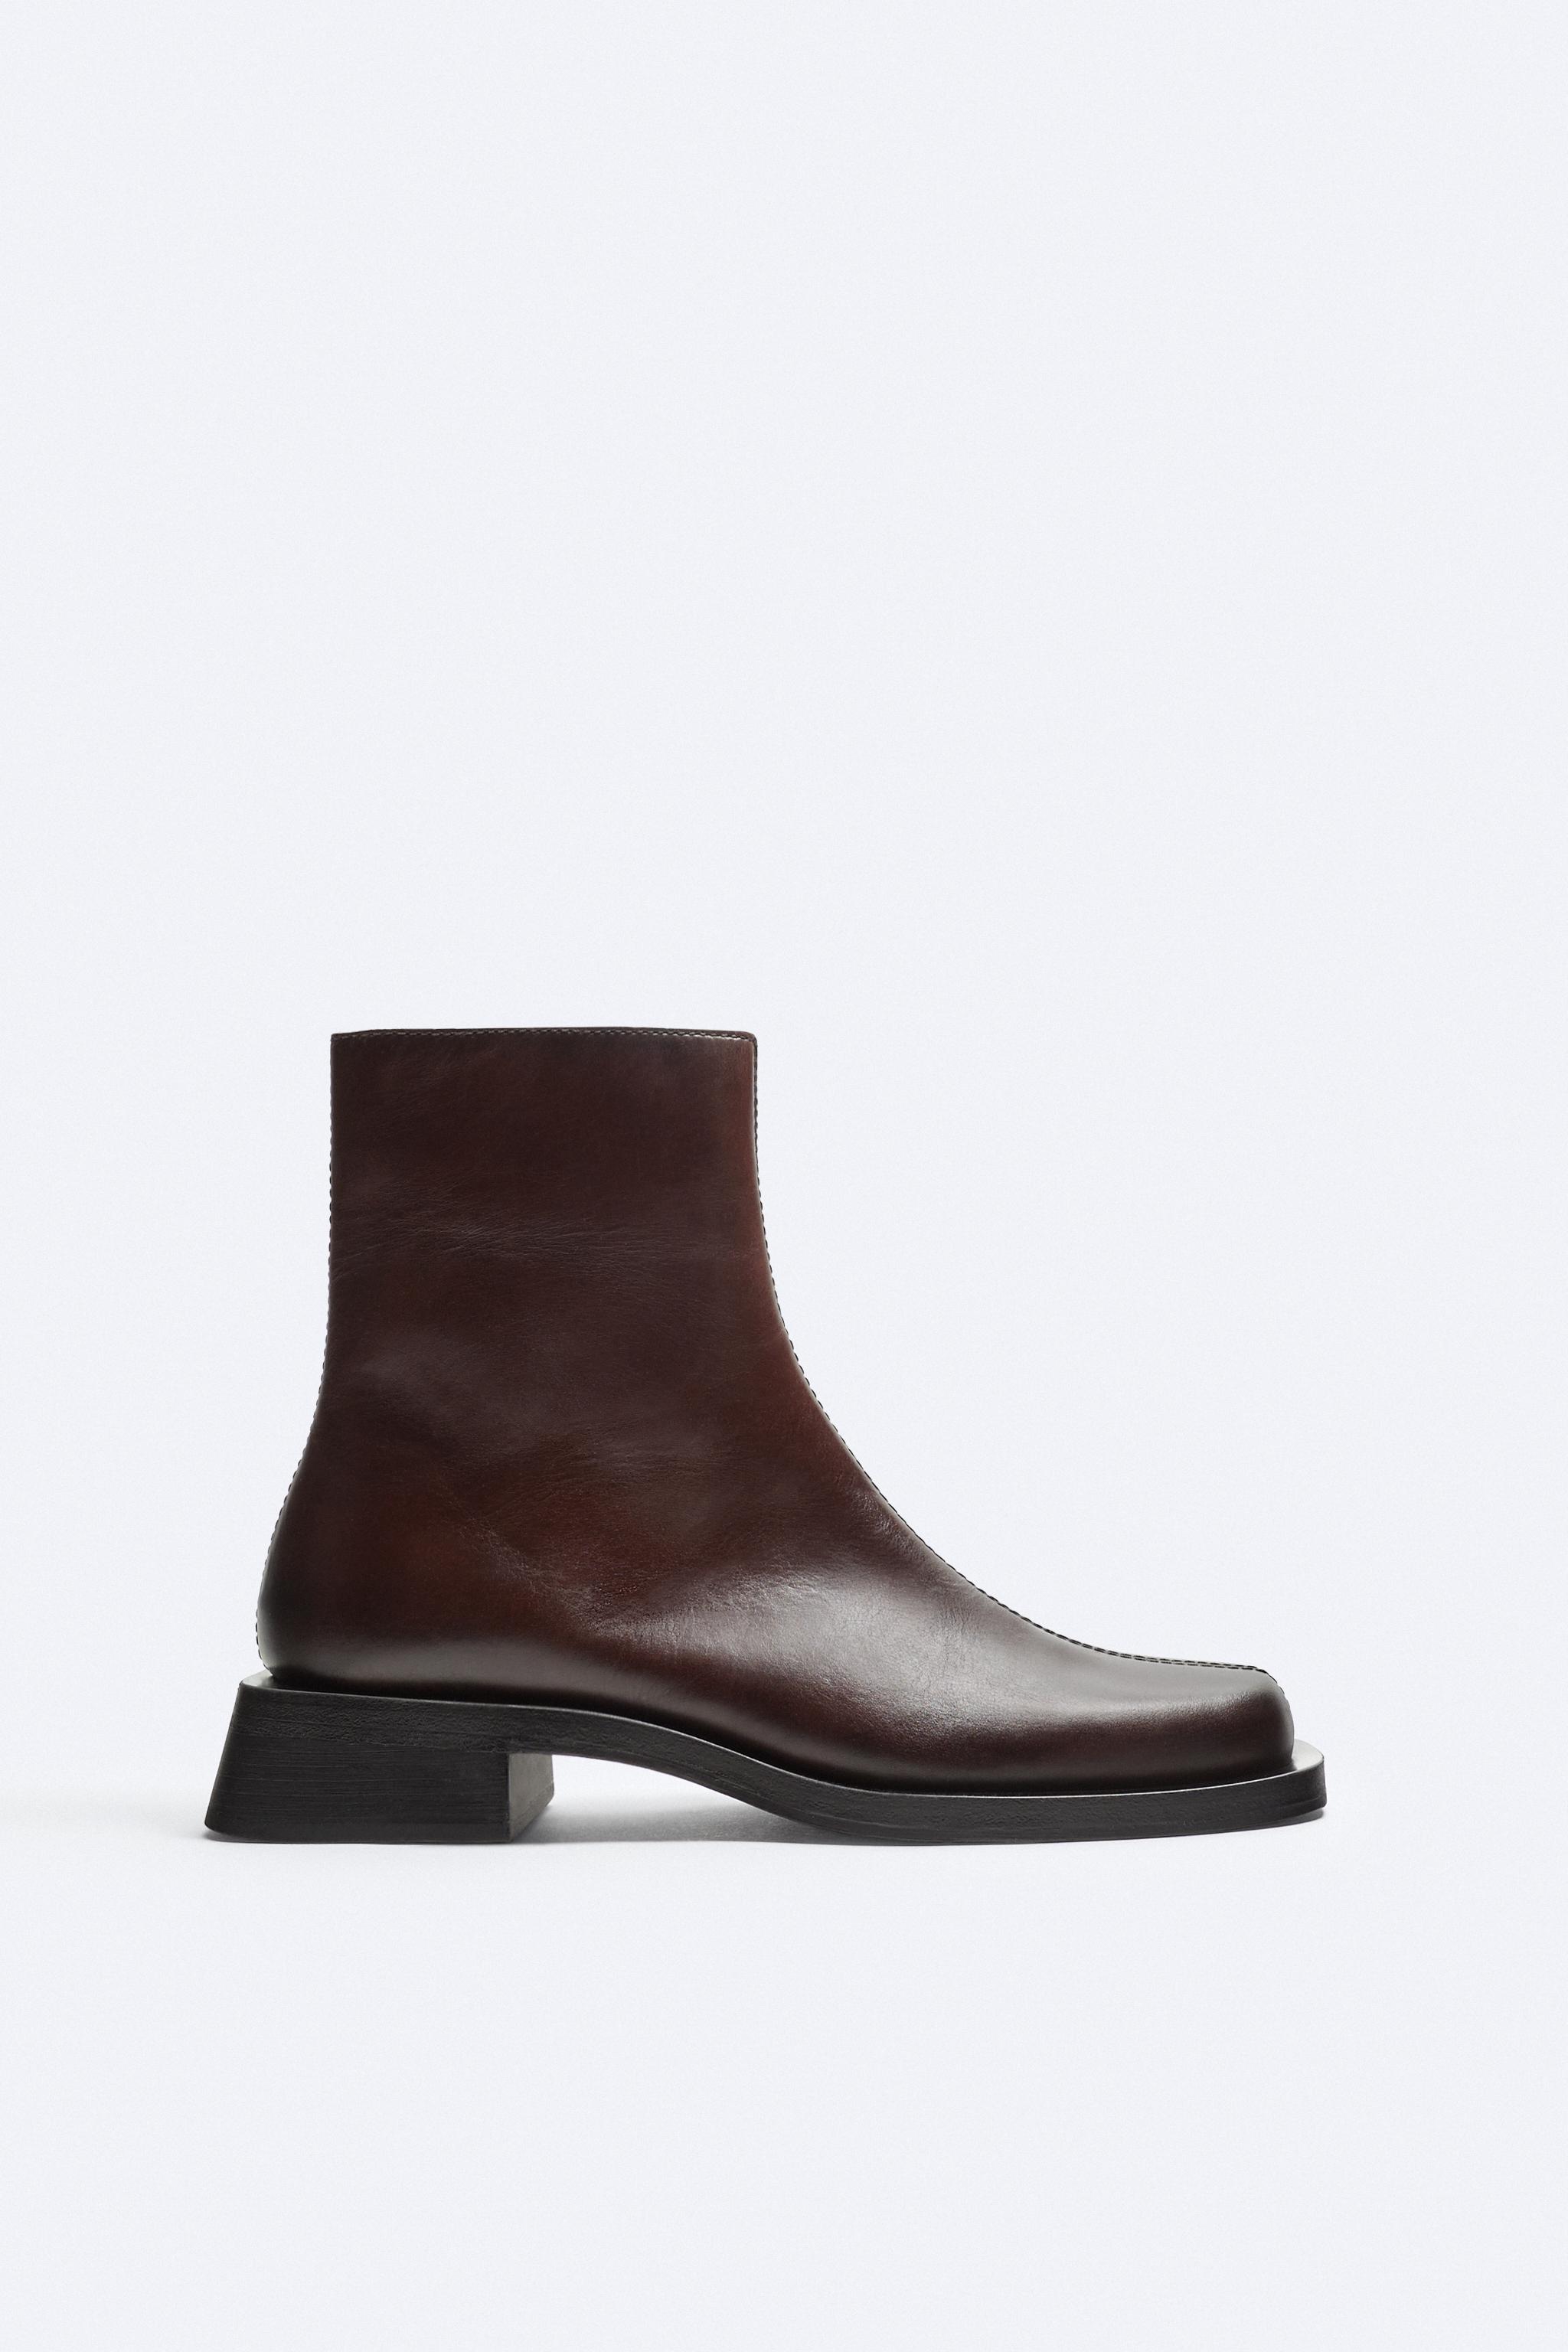 SQUARED TOE LEATHER BOOTS